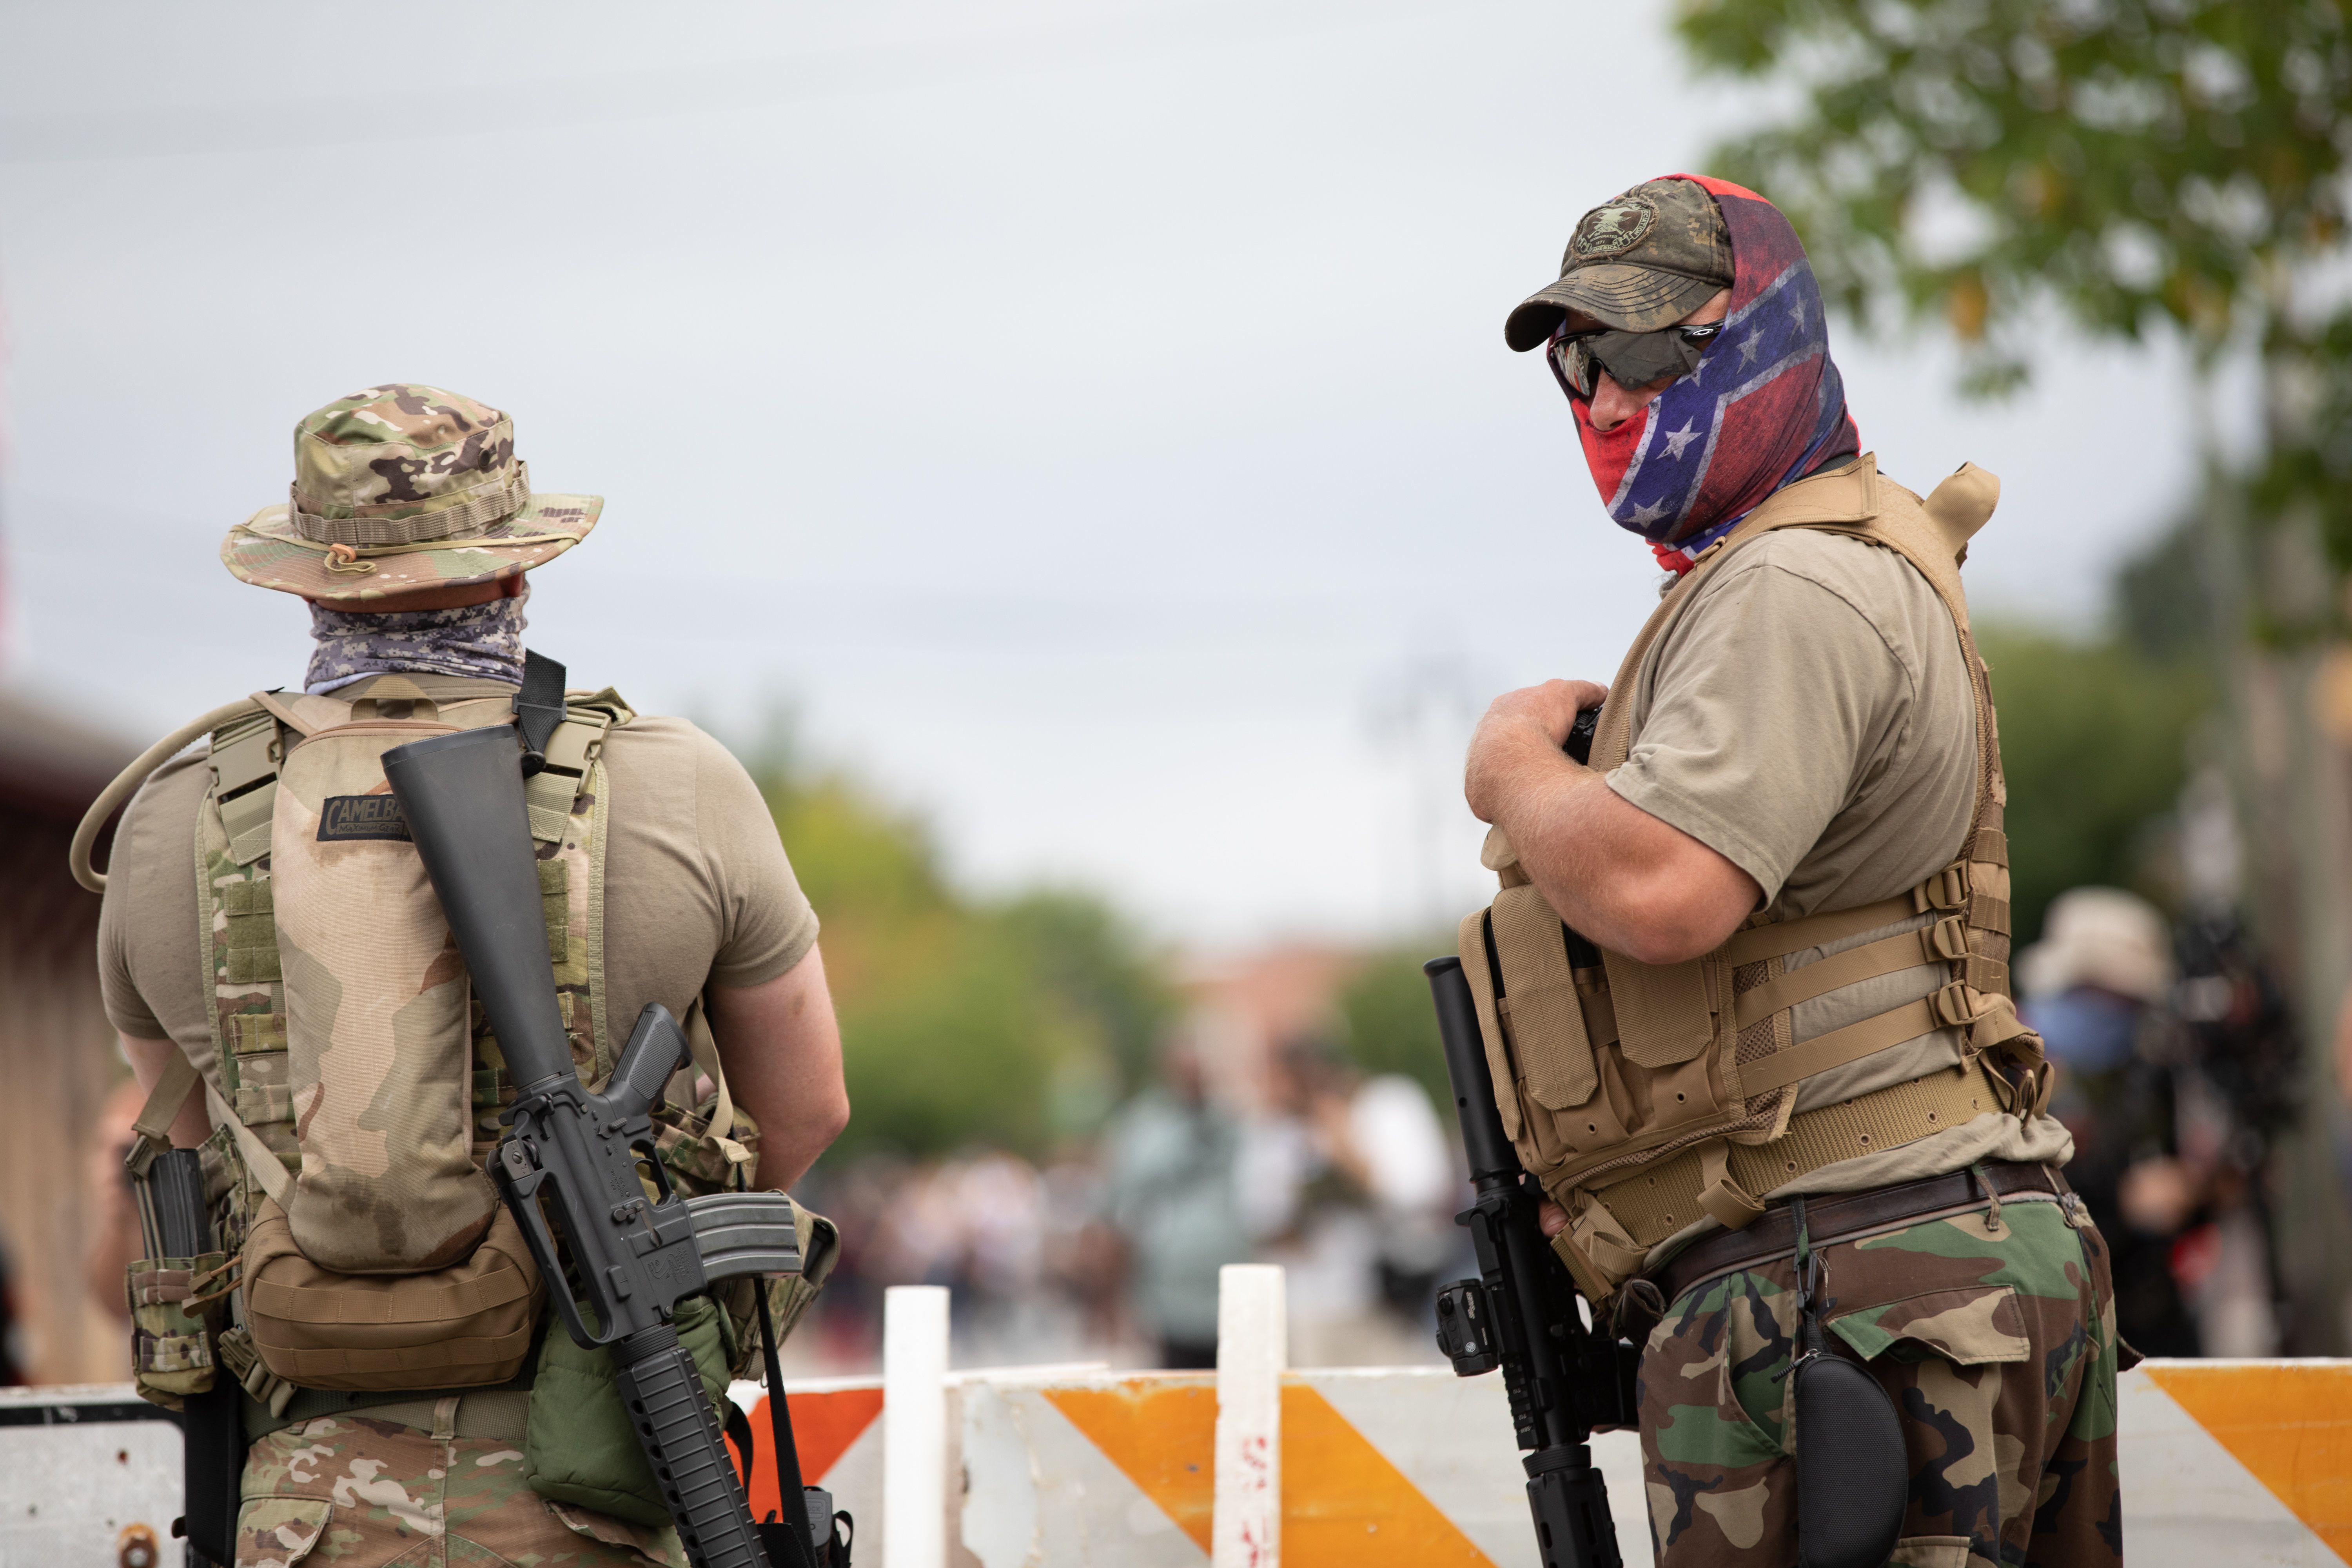 Two armed militia members, one wearing a confederate flag mask. 